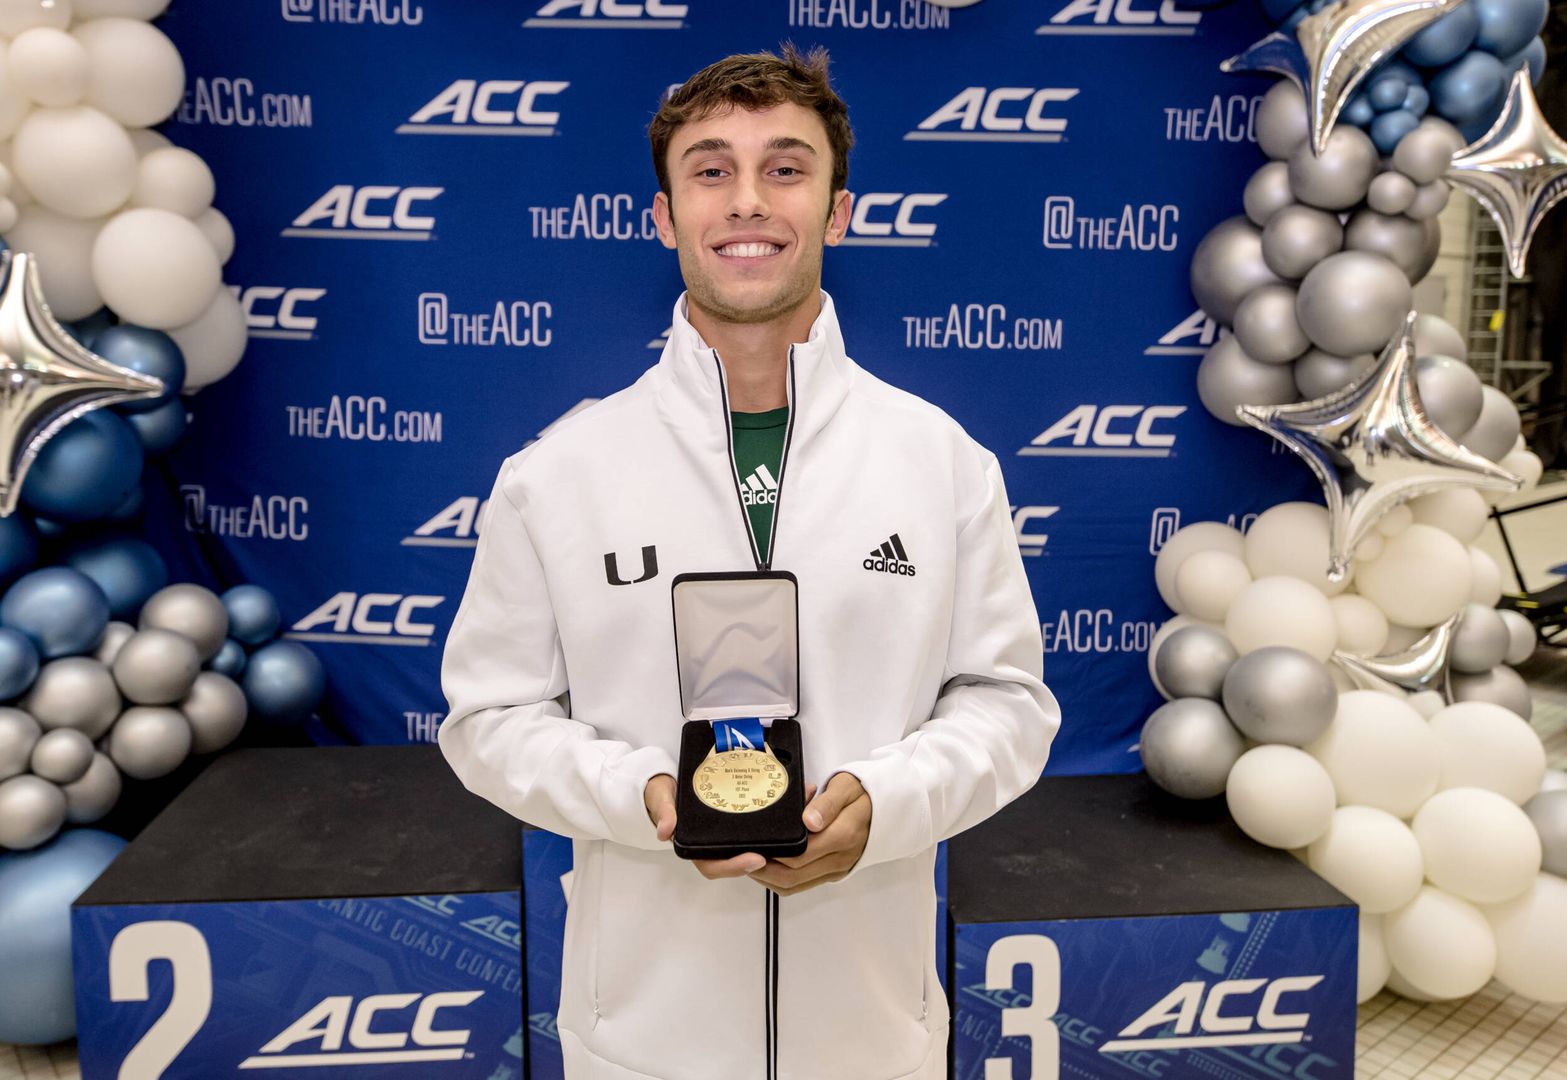 Flory Named ACC Diver of the Year, Ableman Pulls in Coach of the Year